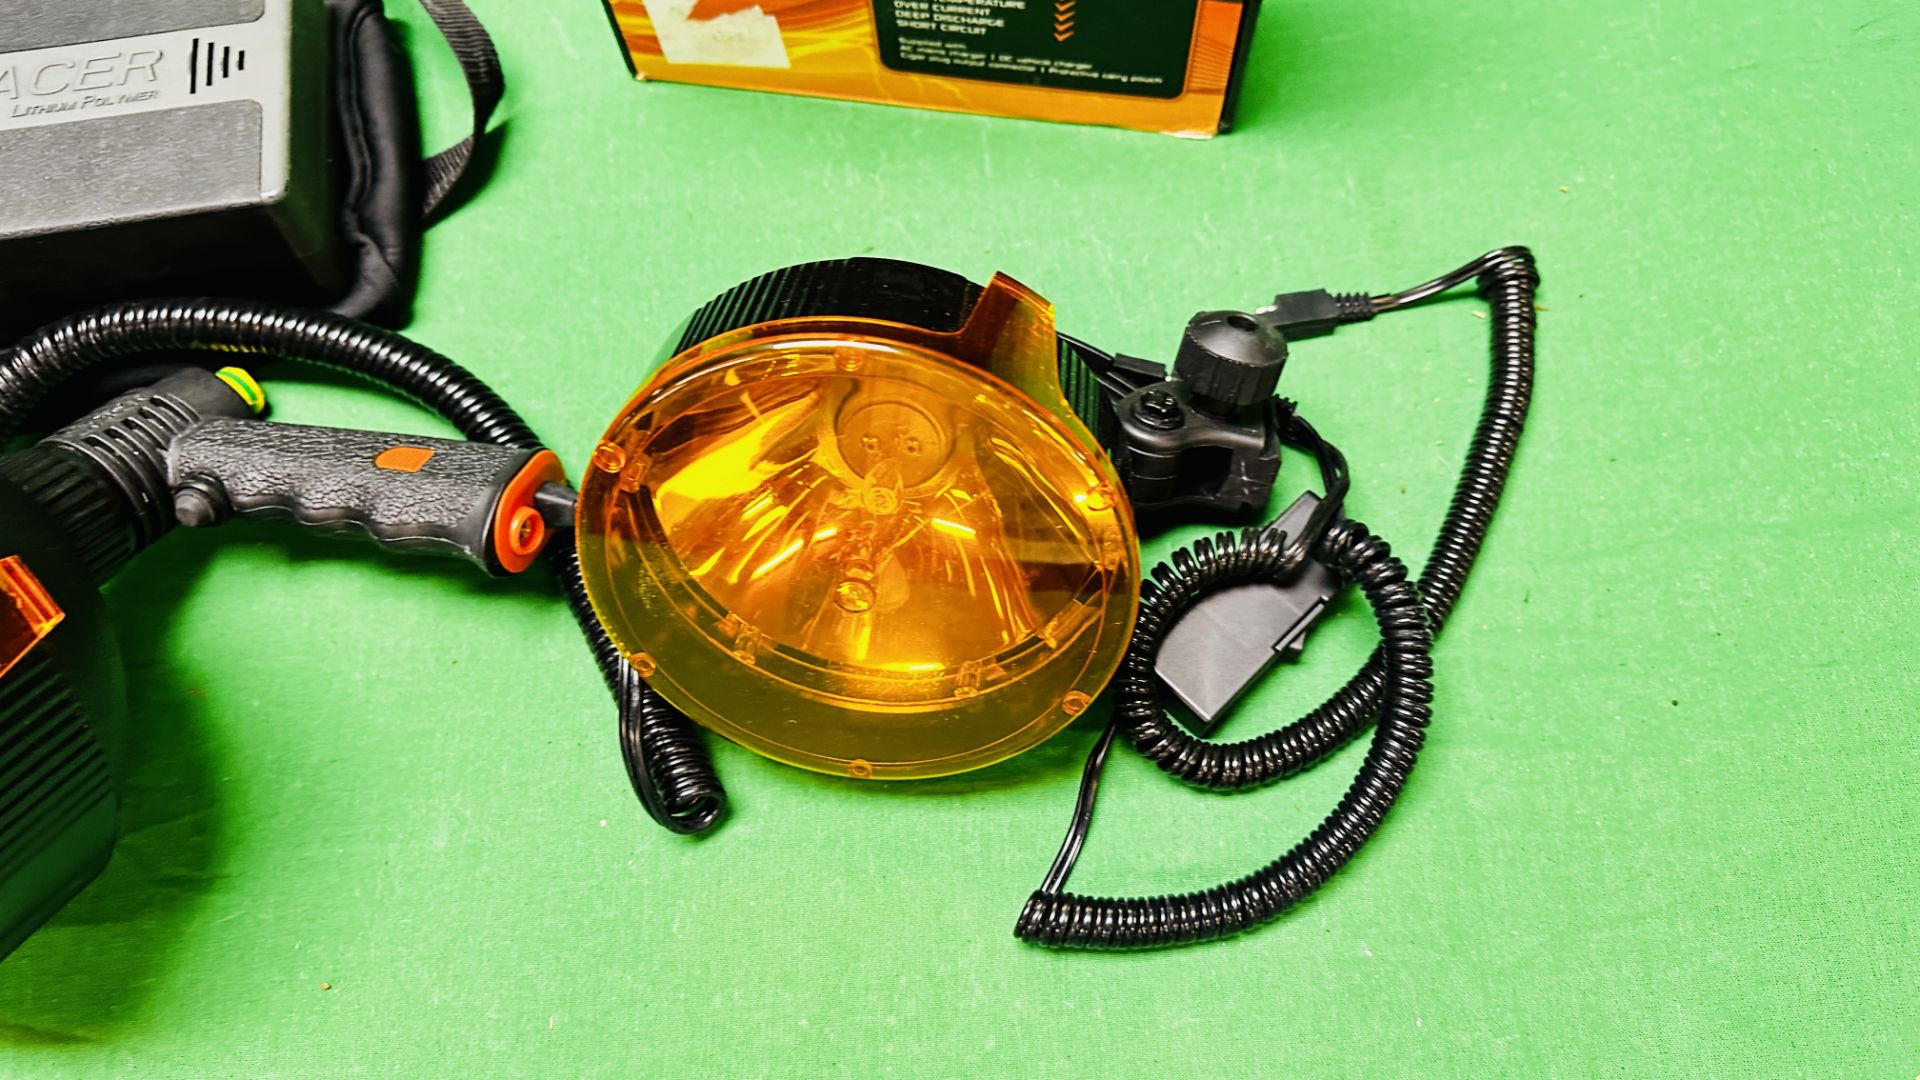 2 X TRACER LAMP LIGHTS WITH ORANGE FILTER COMPLETE WITH BOXED TRACER 12V 4AH BATTERY PACK AND - Image 8 of 13